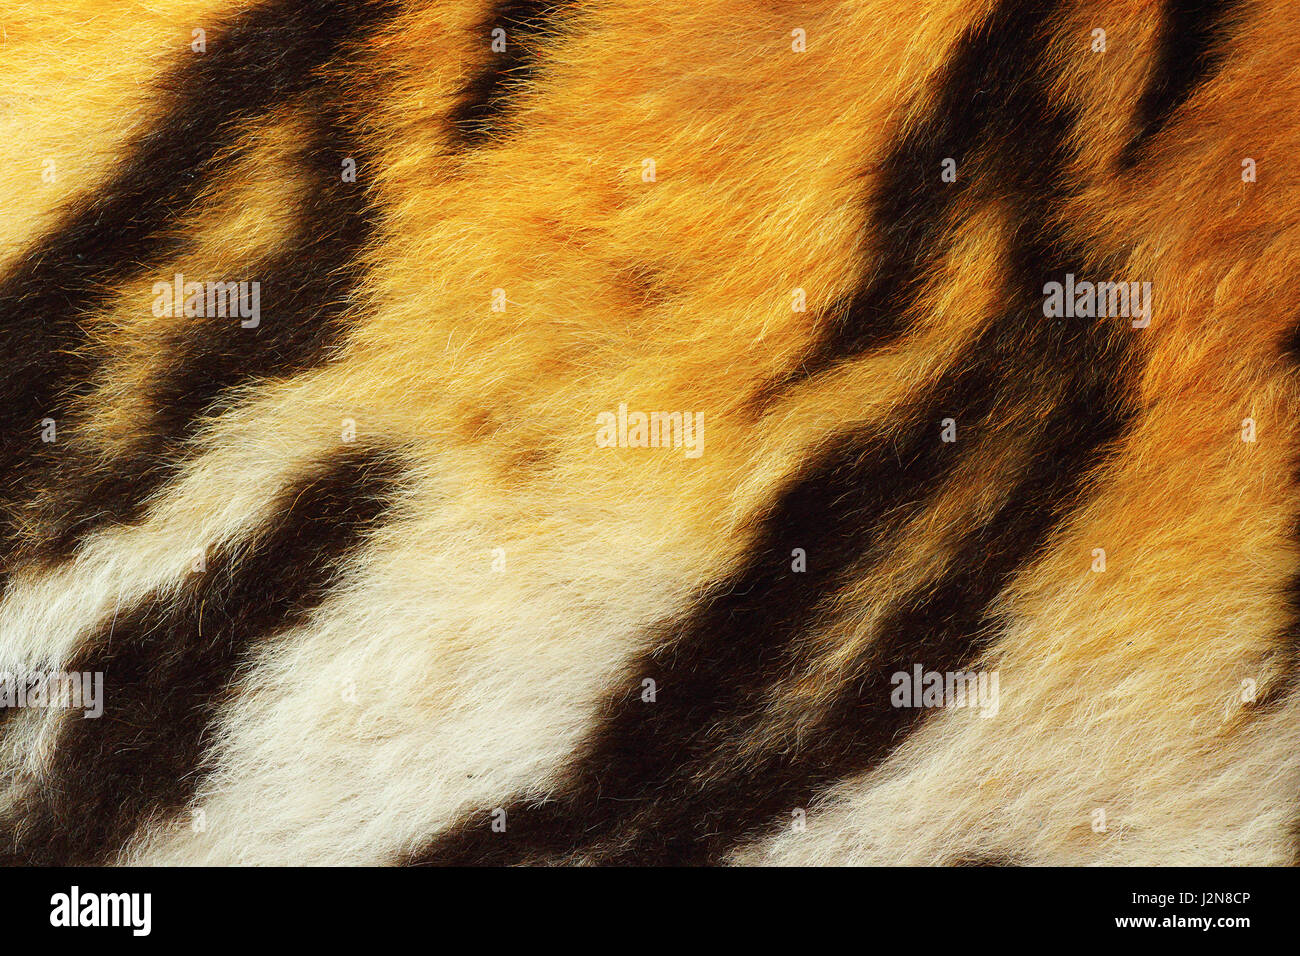 detail of tiger fur, close up of real wild animal pelt Stock Photo